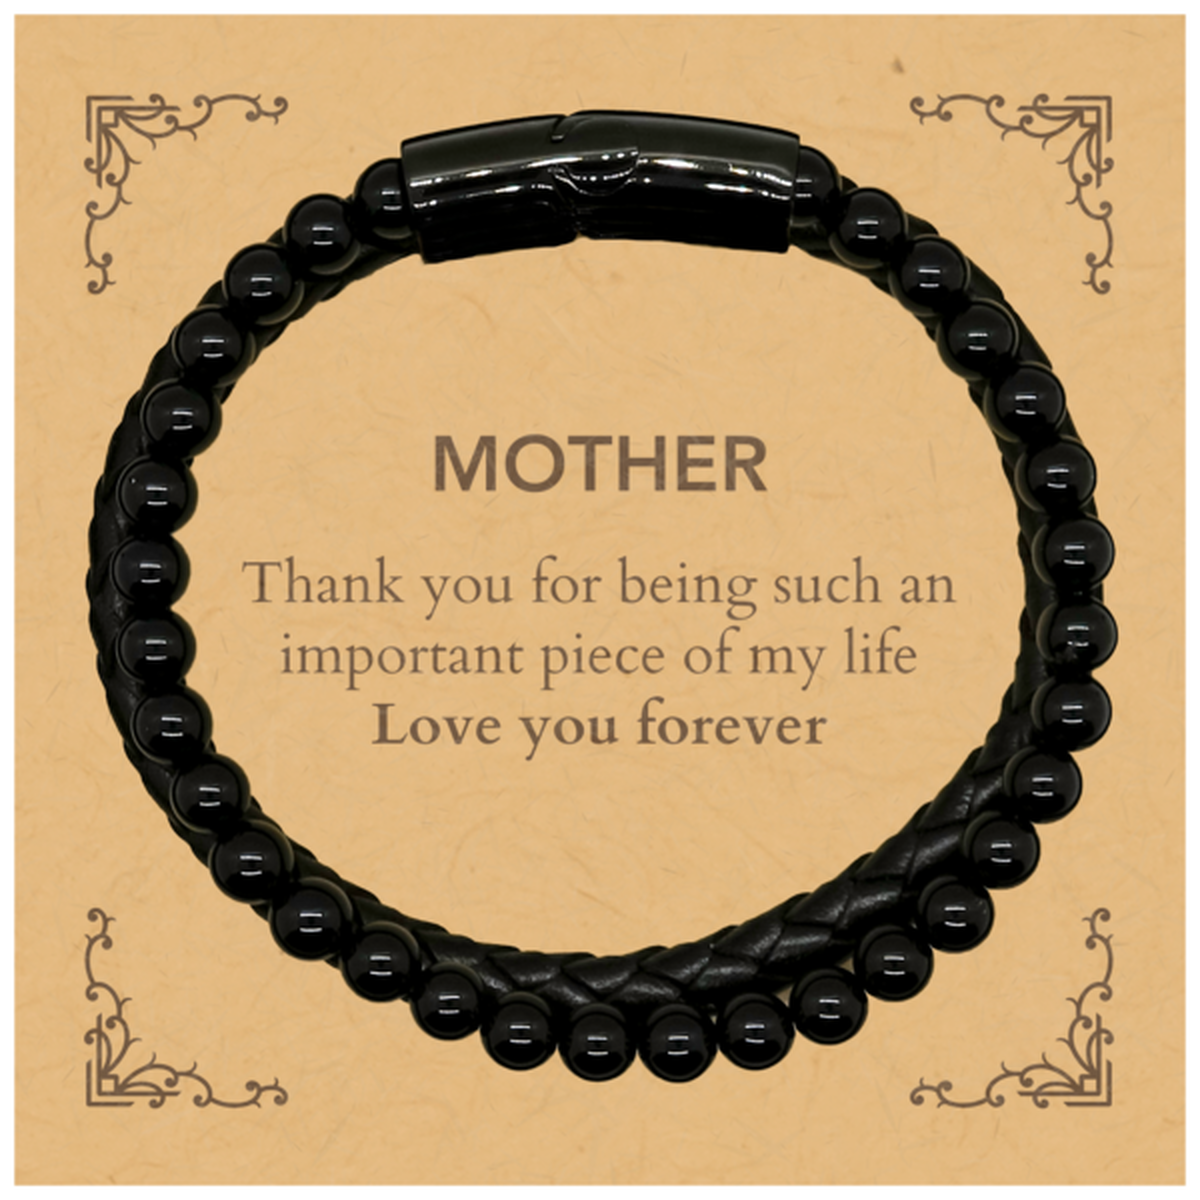 Appropriate Mother Stone Leather Bracelets Epic Birthday Gifts for Mother Thank you for being such an important piece of my life Mother Christmas Mothers Fathers Day